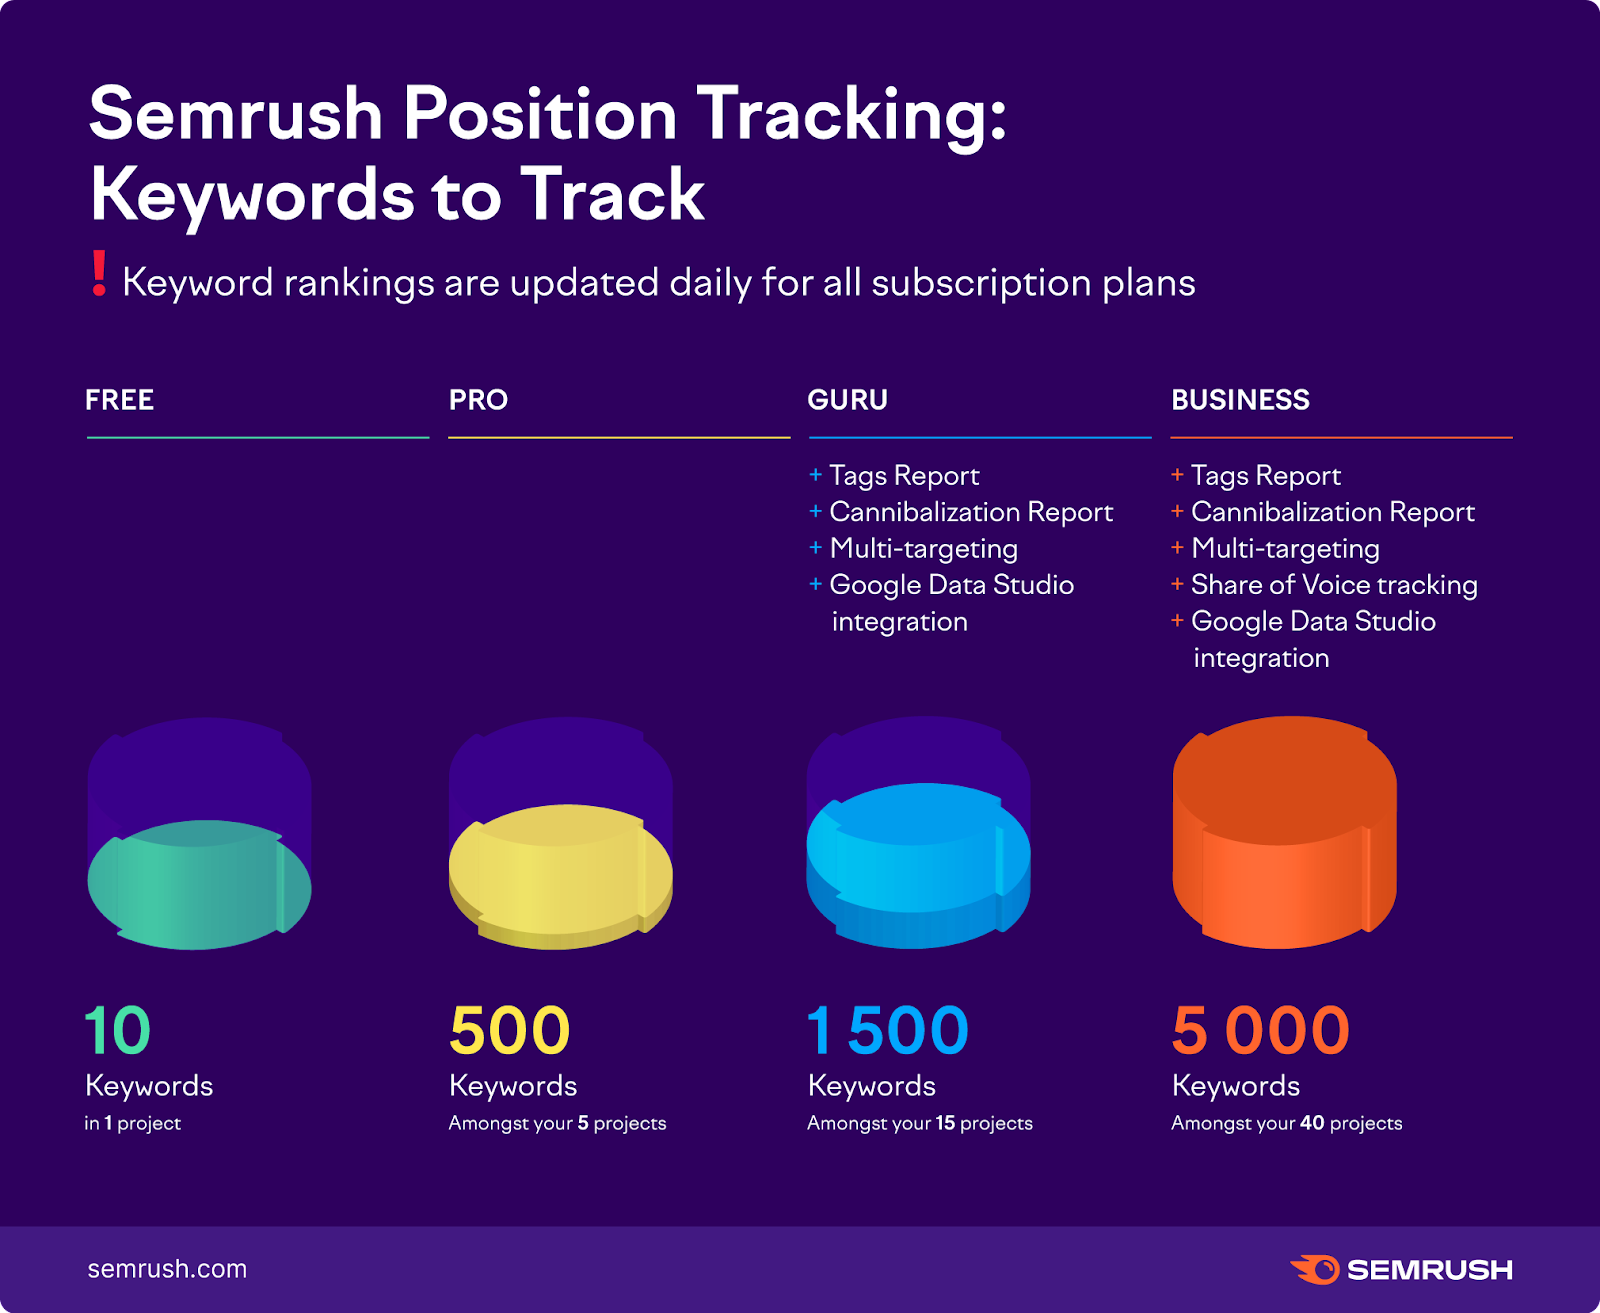 "Semrush Position Tracking: Keywords to Track" pricing options